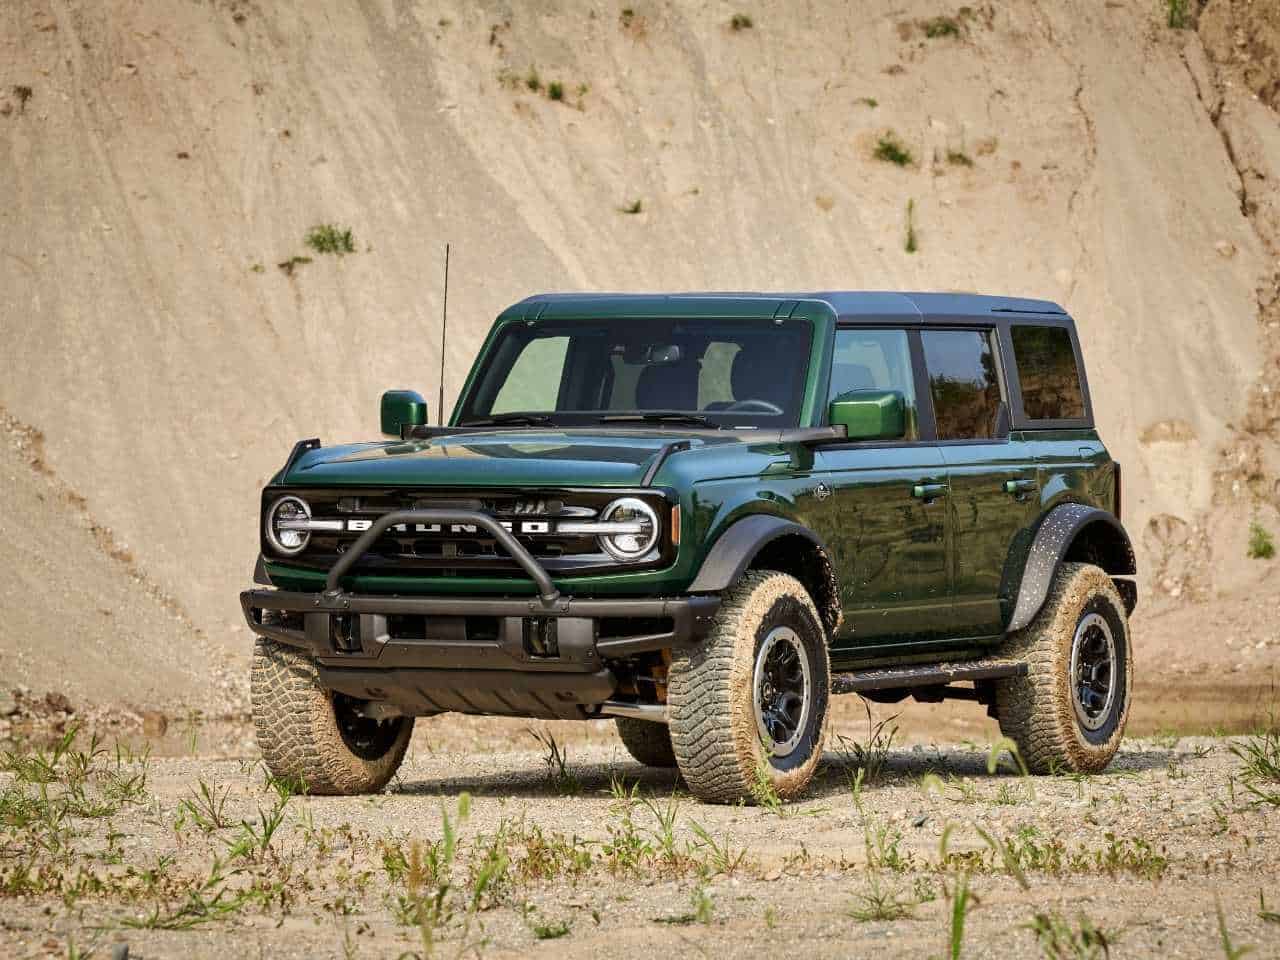 What Ford Bronco Should I Get? Pick the Right Trim With This Quick In-Depth Guide